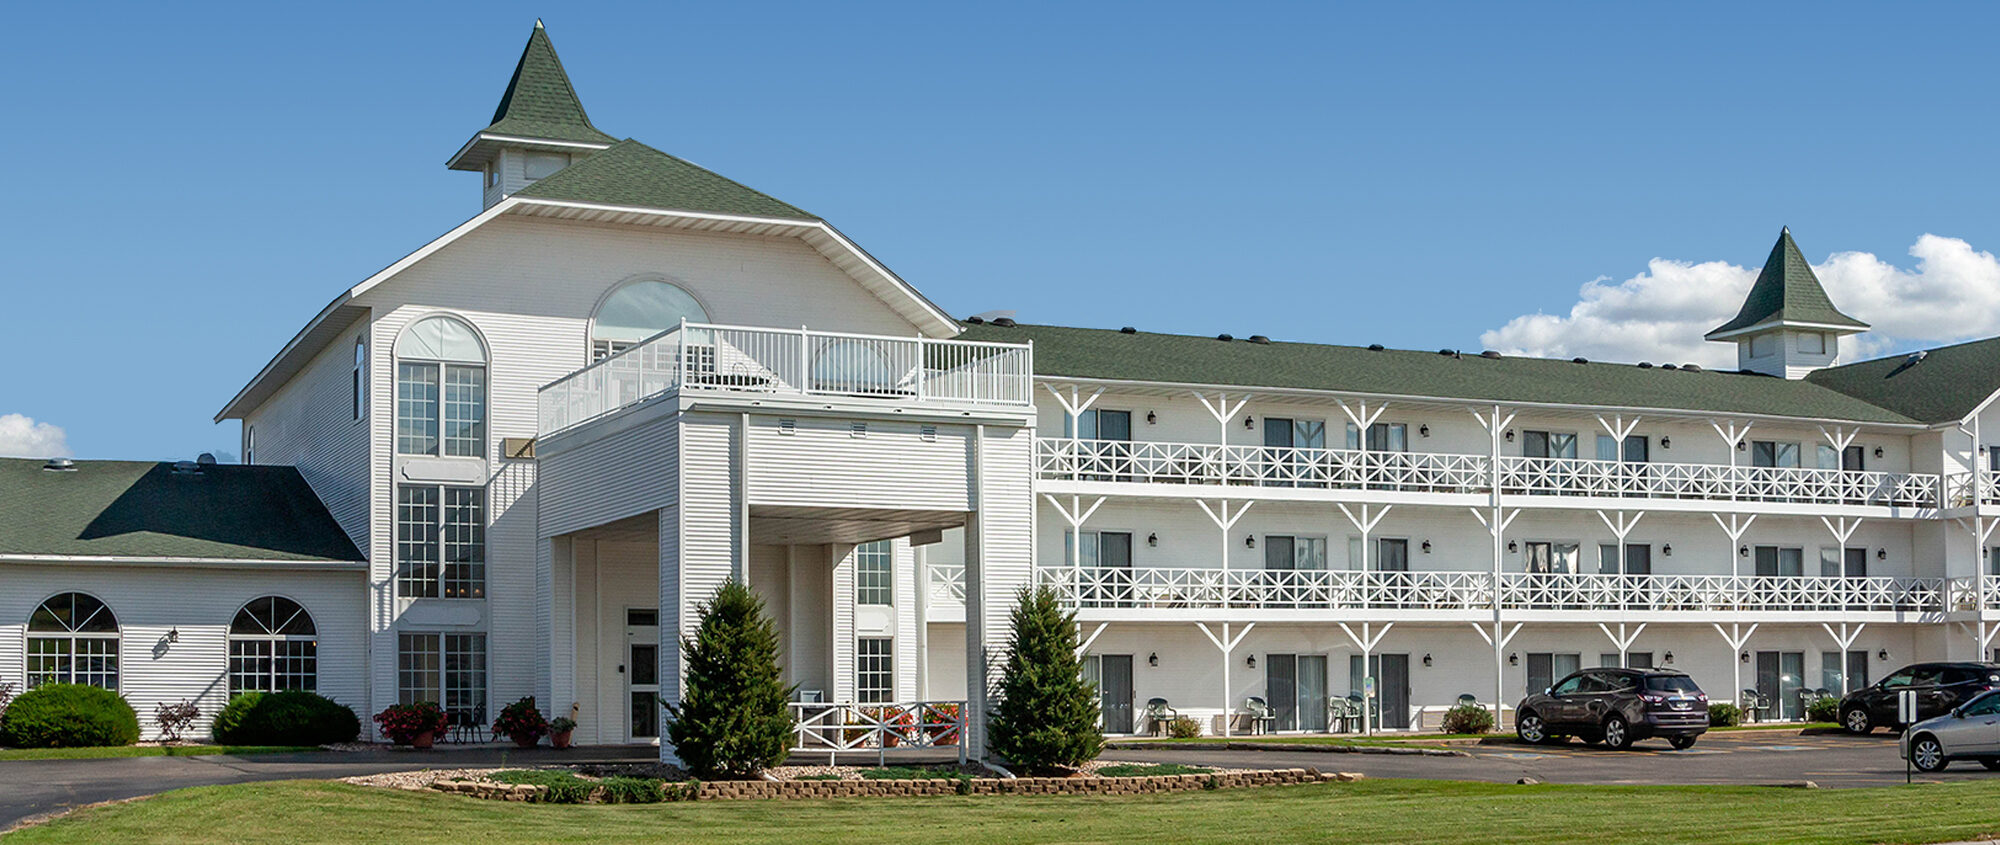 Wisconsin Dells Clarion & Wintergreen Conference Center feature comfortable, affordable rooms, friendly service